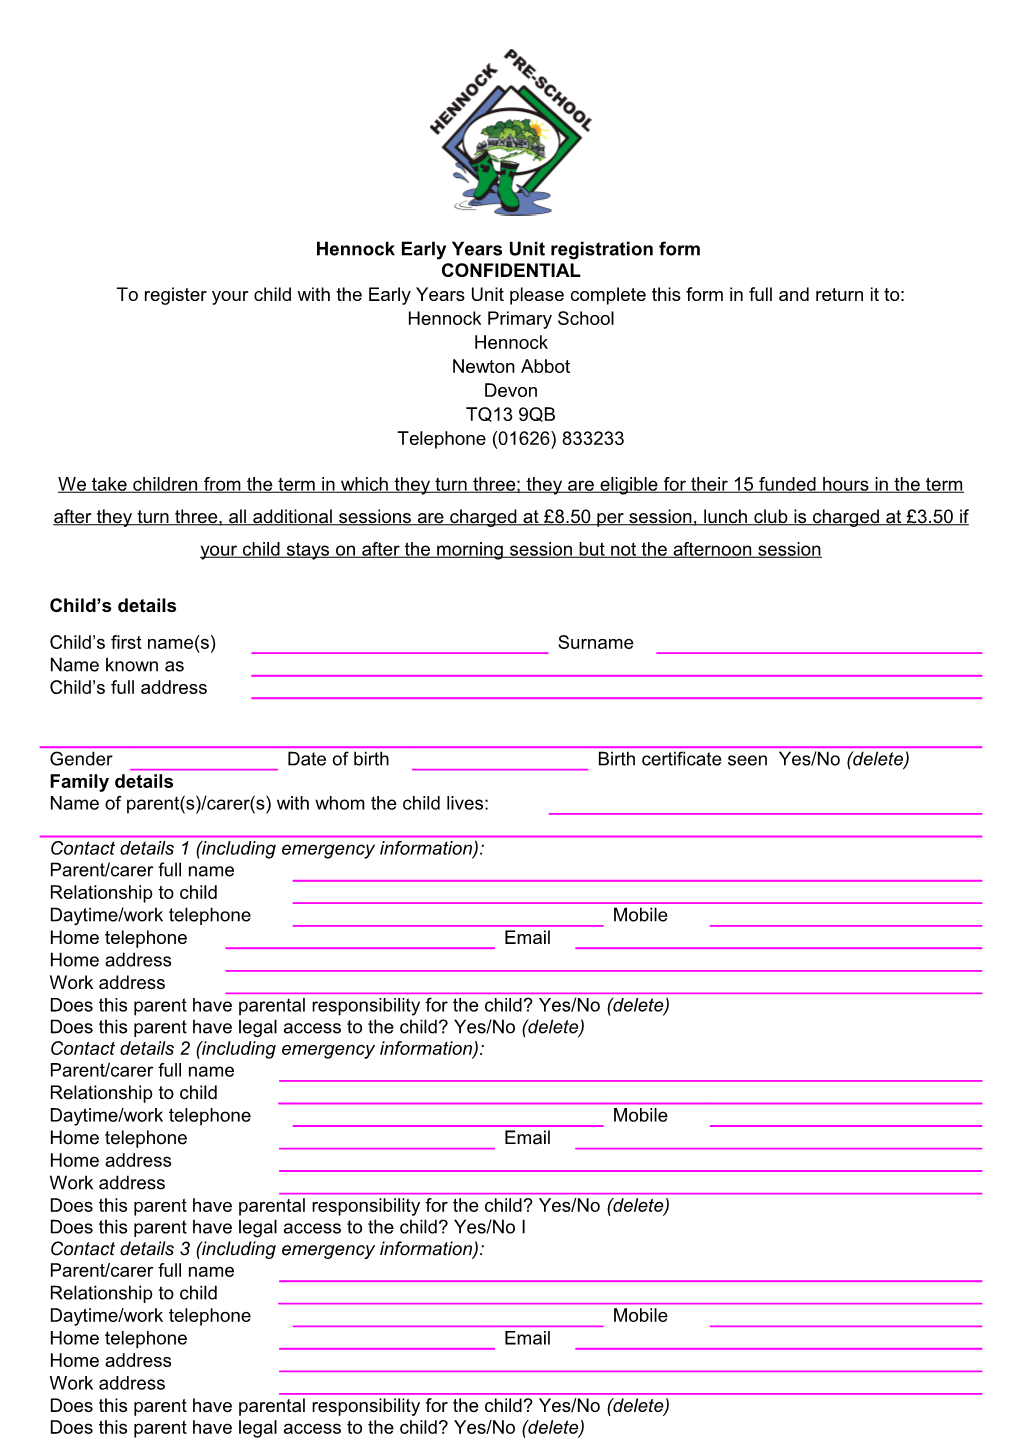 Hennock Early Years Unit Registration Form